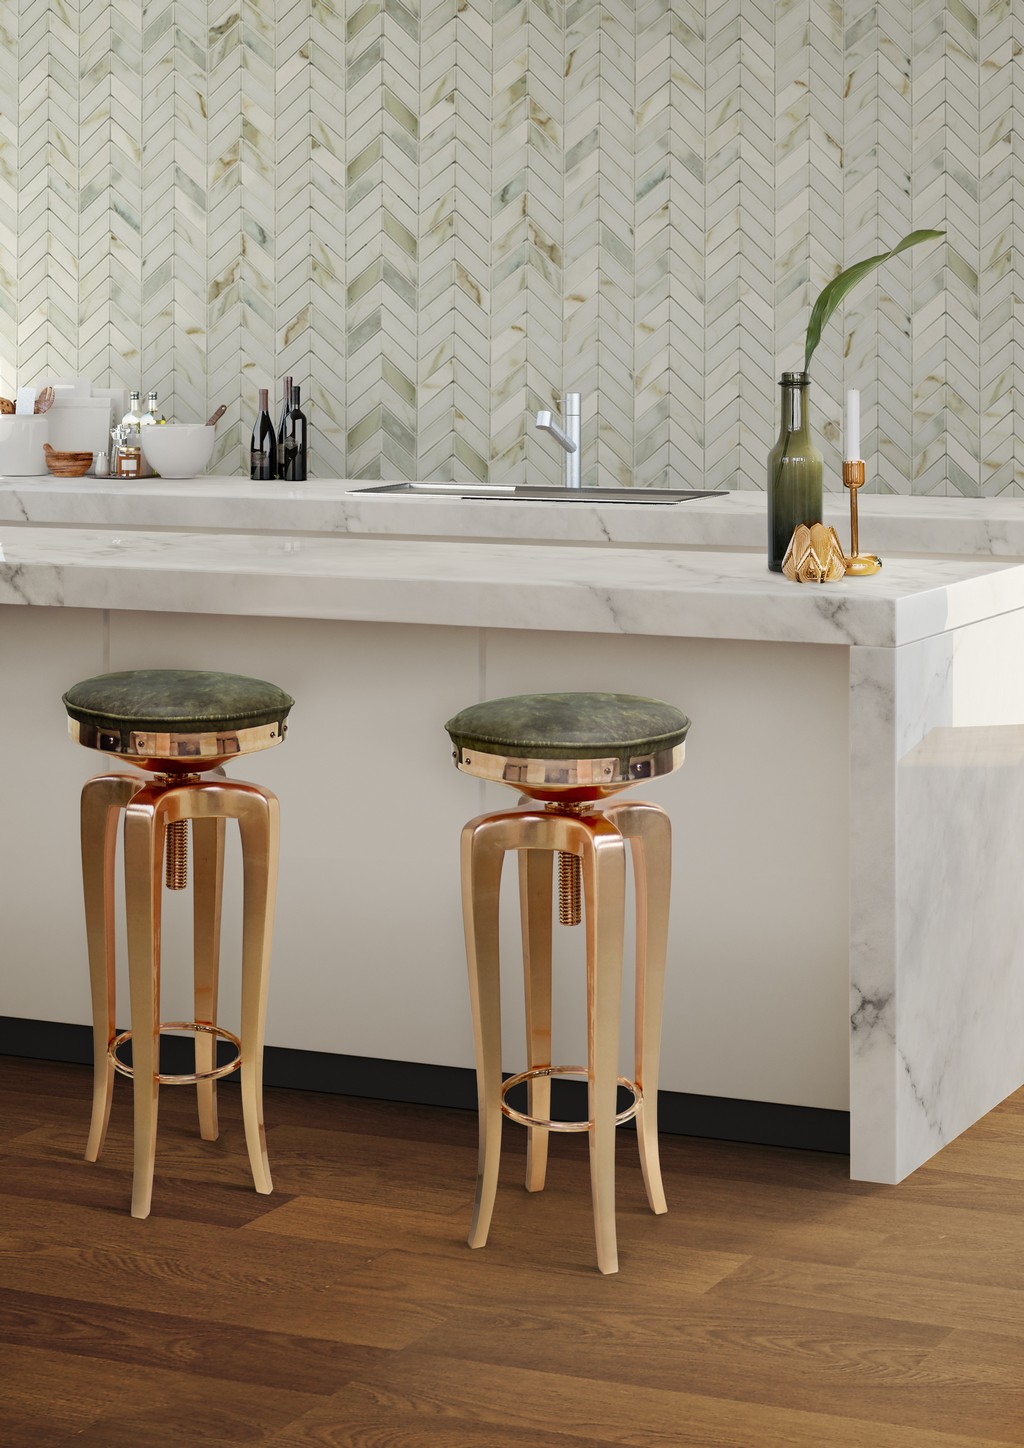 7 Kitchen Counter Stools For Small Places, Small Kitchen Breakfast Bar Stools